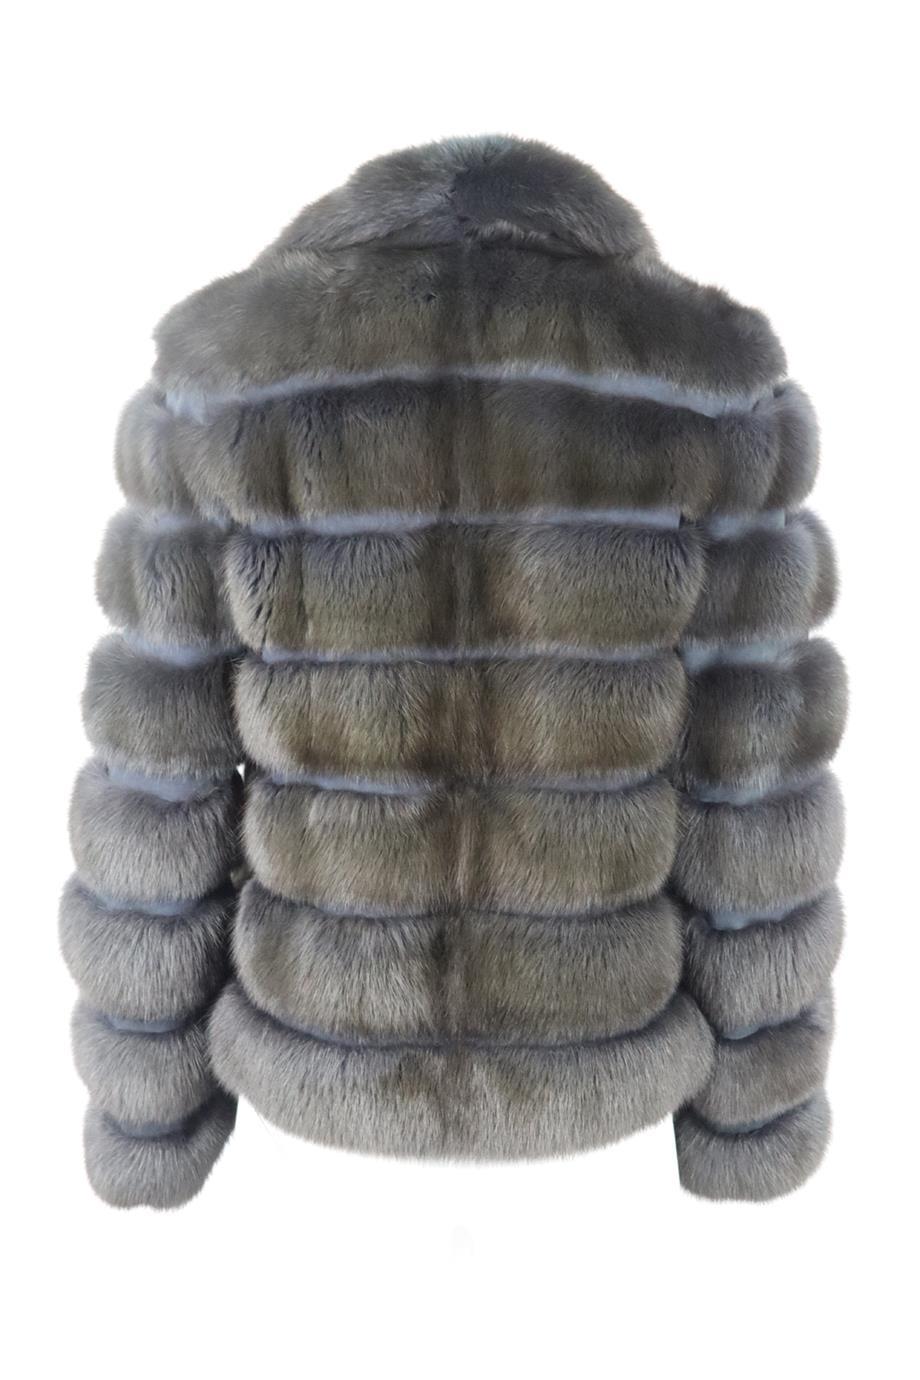 Women's Dennis Basso Sable Fur And Suede Jacket Small